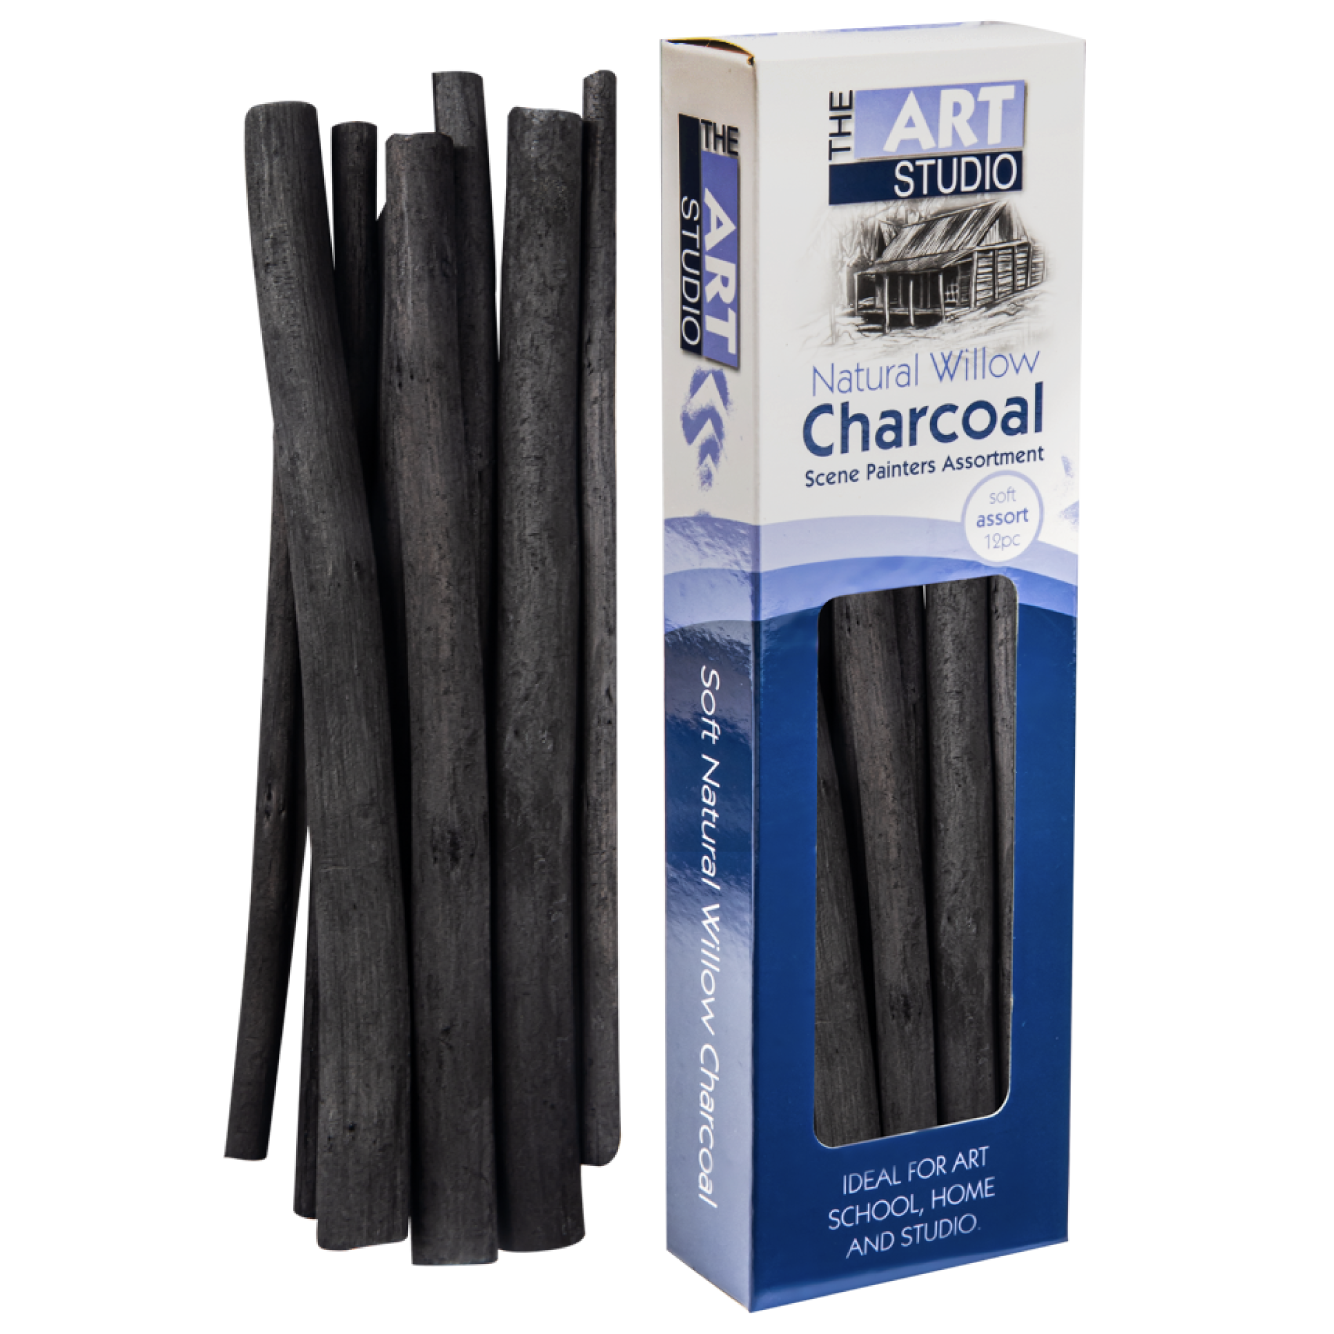 The Most The Art Studio Natural Willow Charcoal Scene Painters Assorted  Sizes 12 Pieces 637 is Now available at a price that is unbeatable